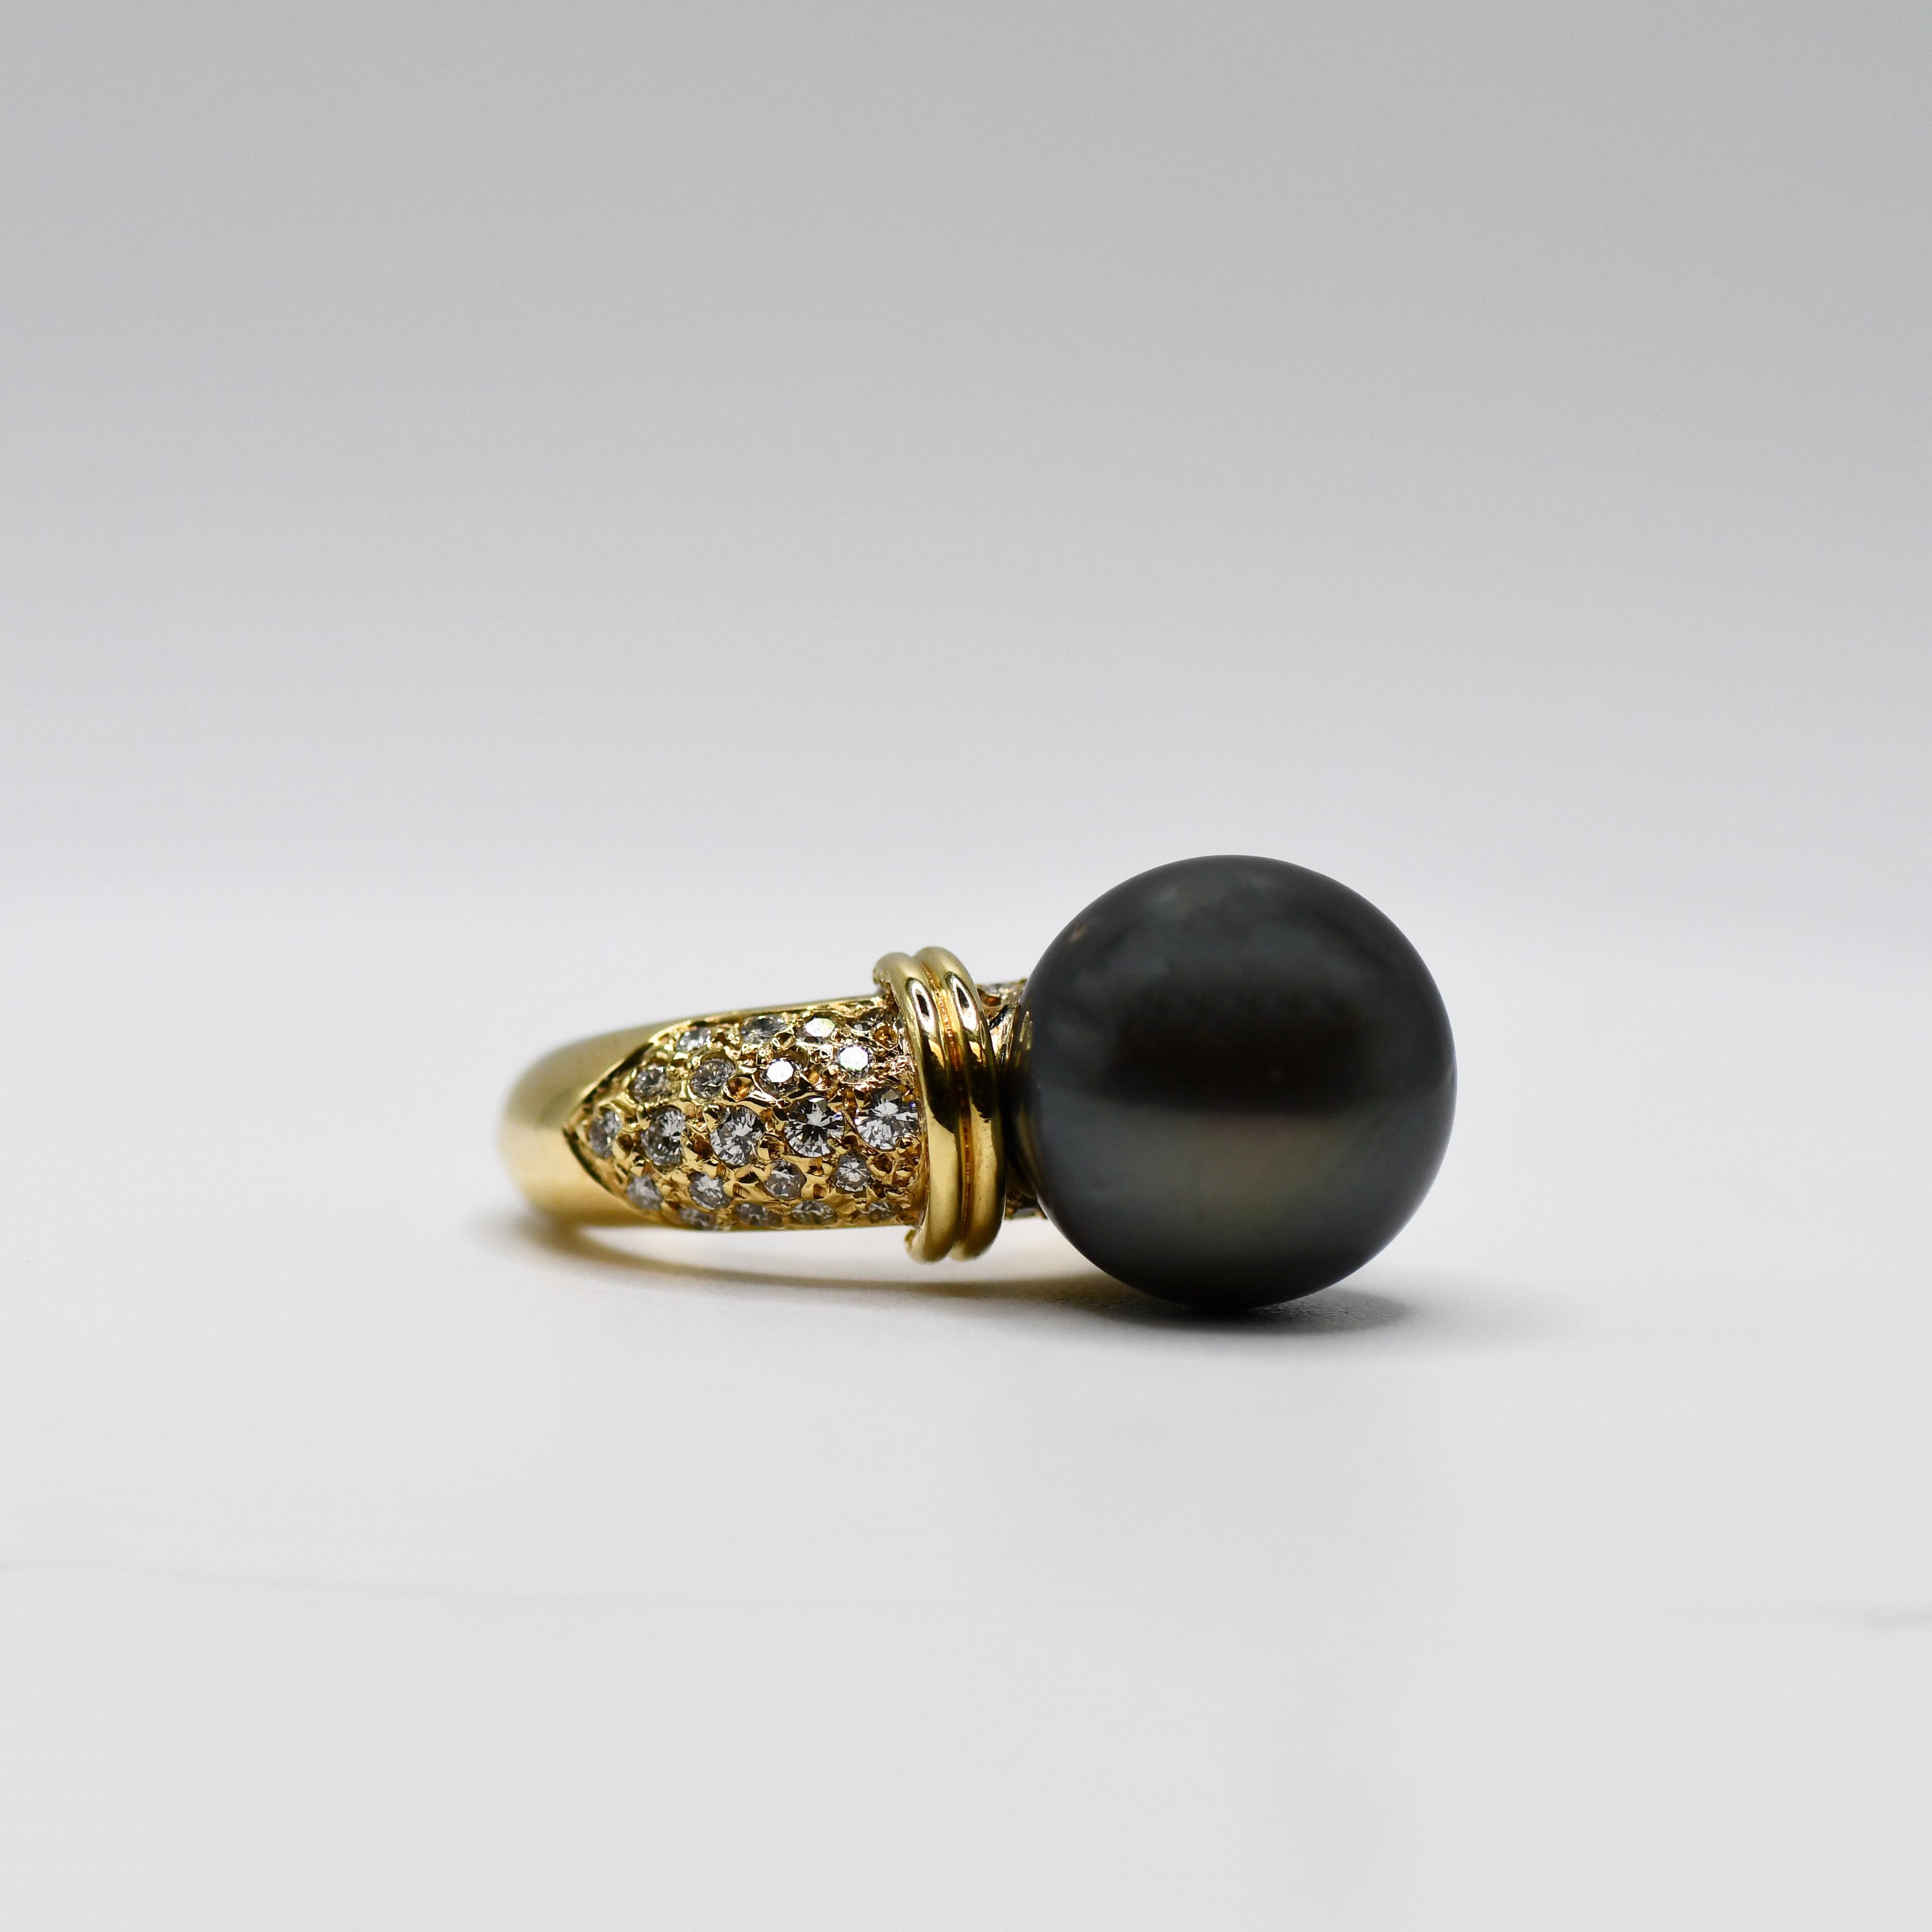 Ladies Tahitian pearl and diamond ring in 18k yellow gold setting.
Tests 18k and weighs 10.7 grams gross weight.
The black Tahitian pearl  measures 13.5mm in diameter.
It has some natural surface blemishes.
The diamonds on the sides are round